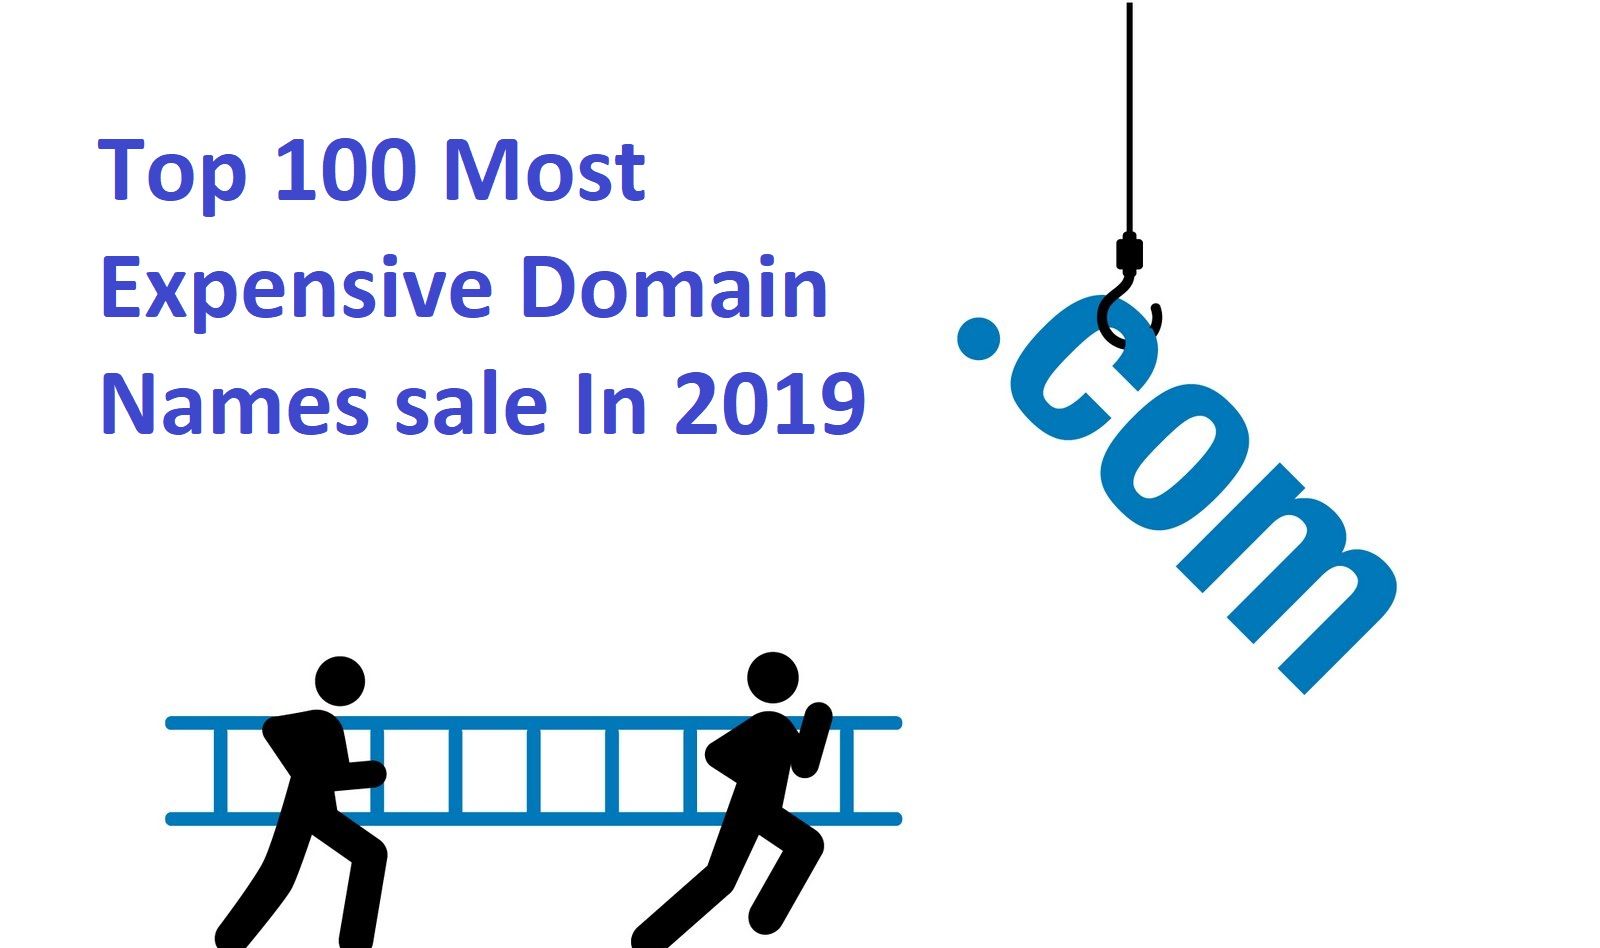 Top 100 Most Expensive Domain Names sale In 2019